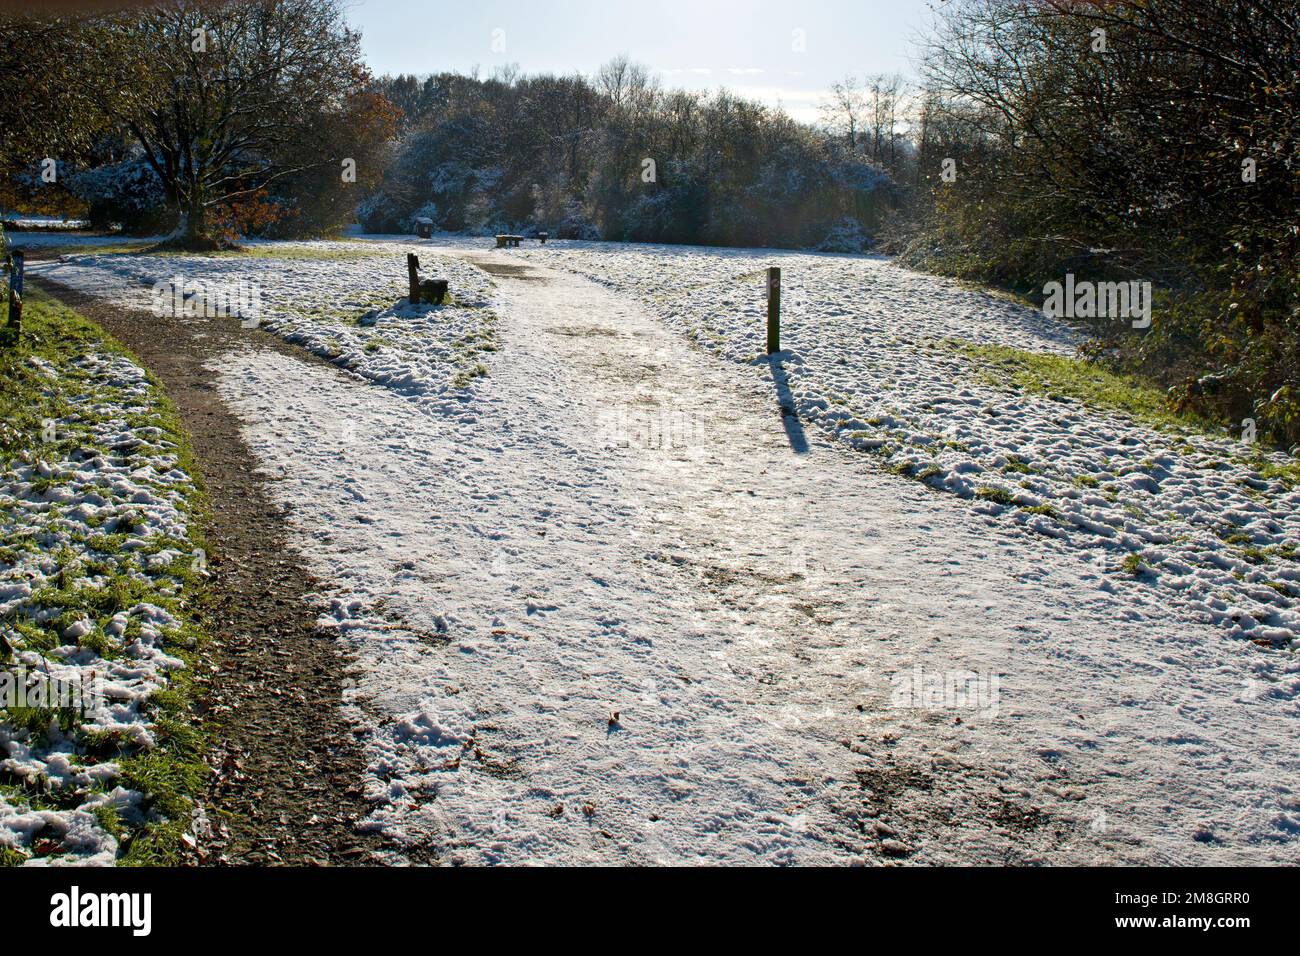 A snowy scene in the Kentish countryside, England, during a short cold spell in December 2022 Stock Photo